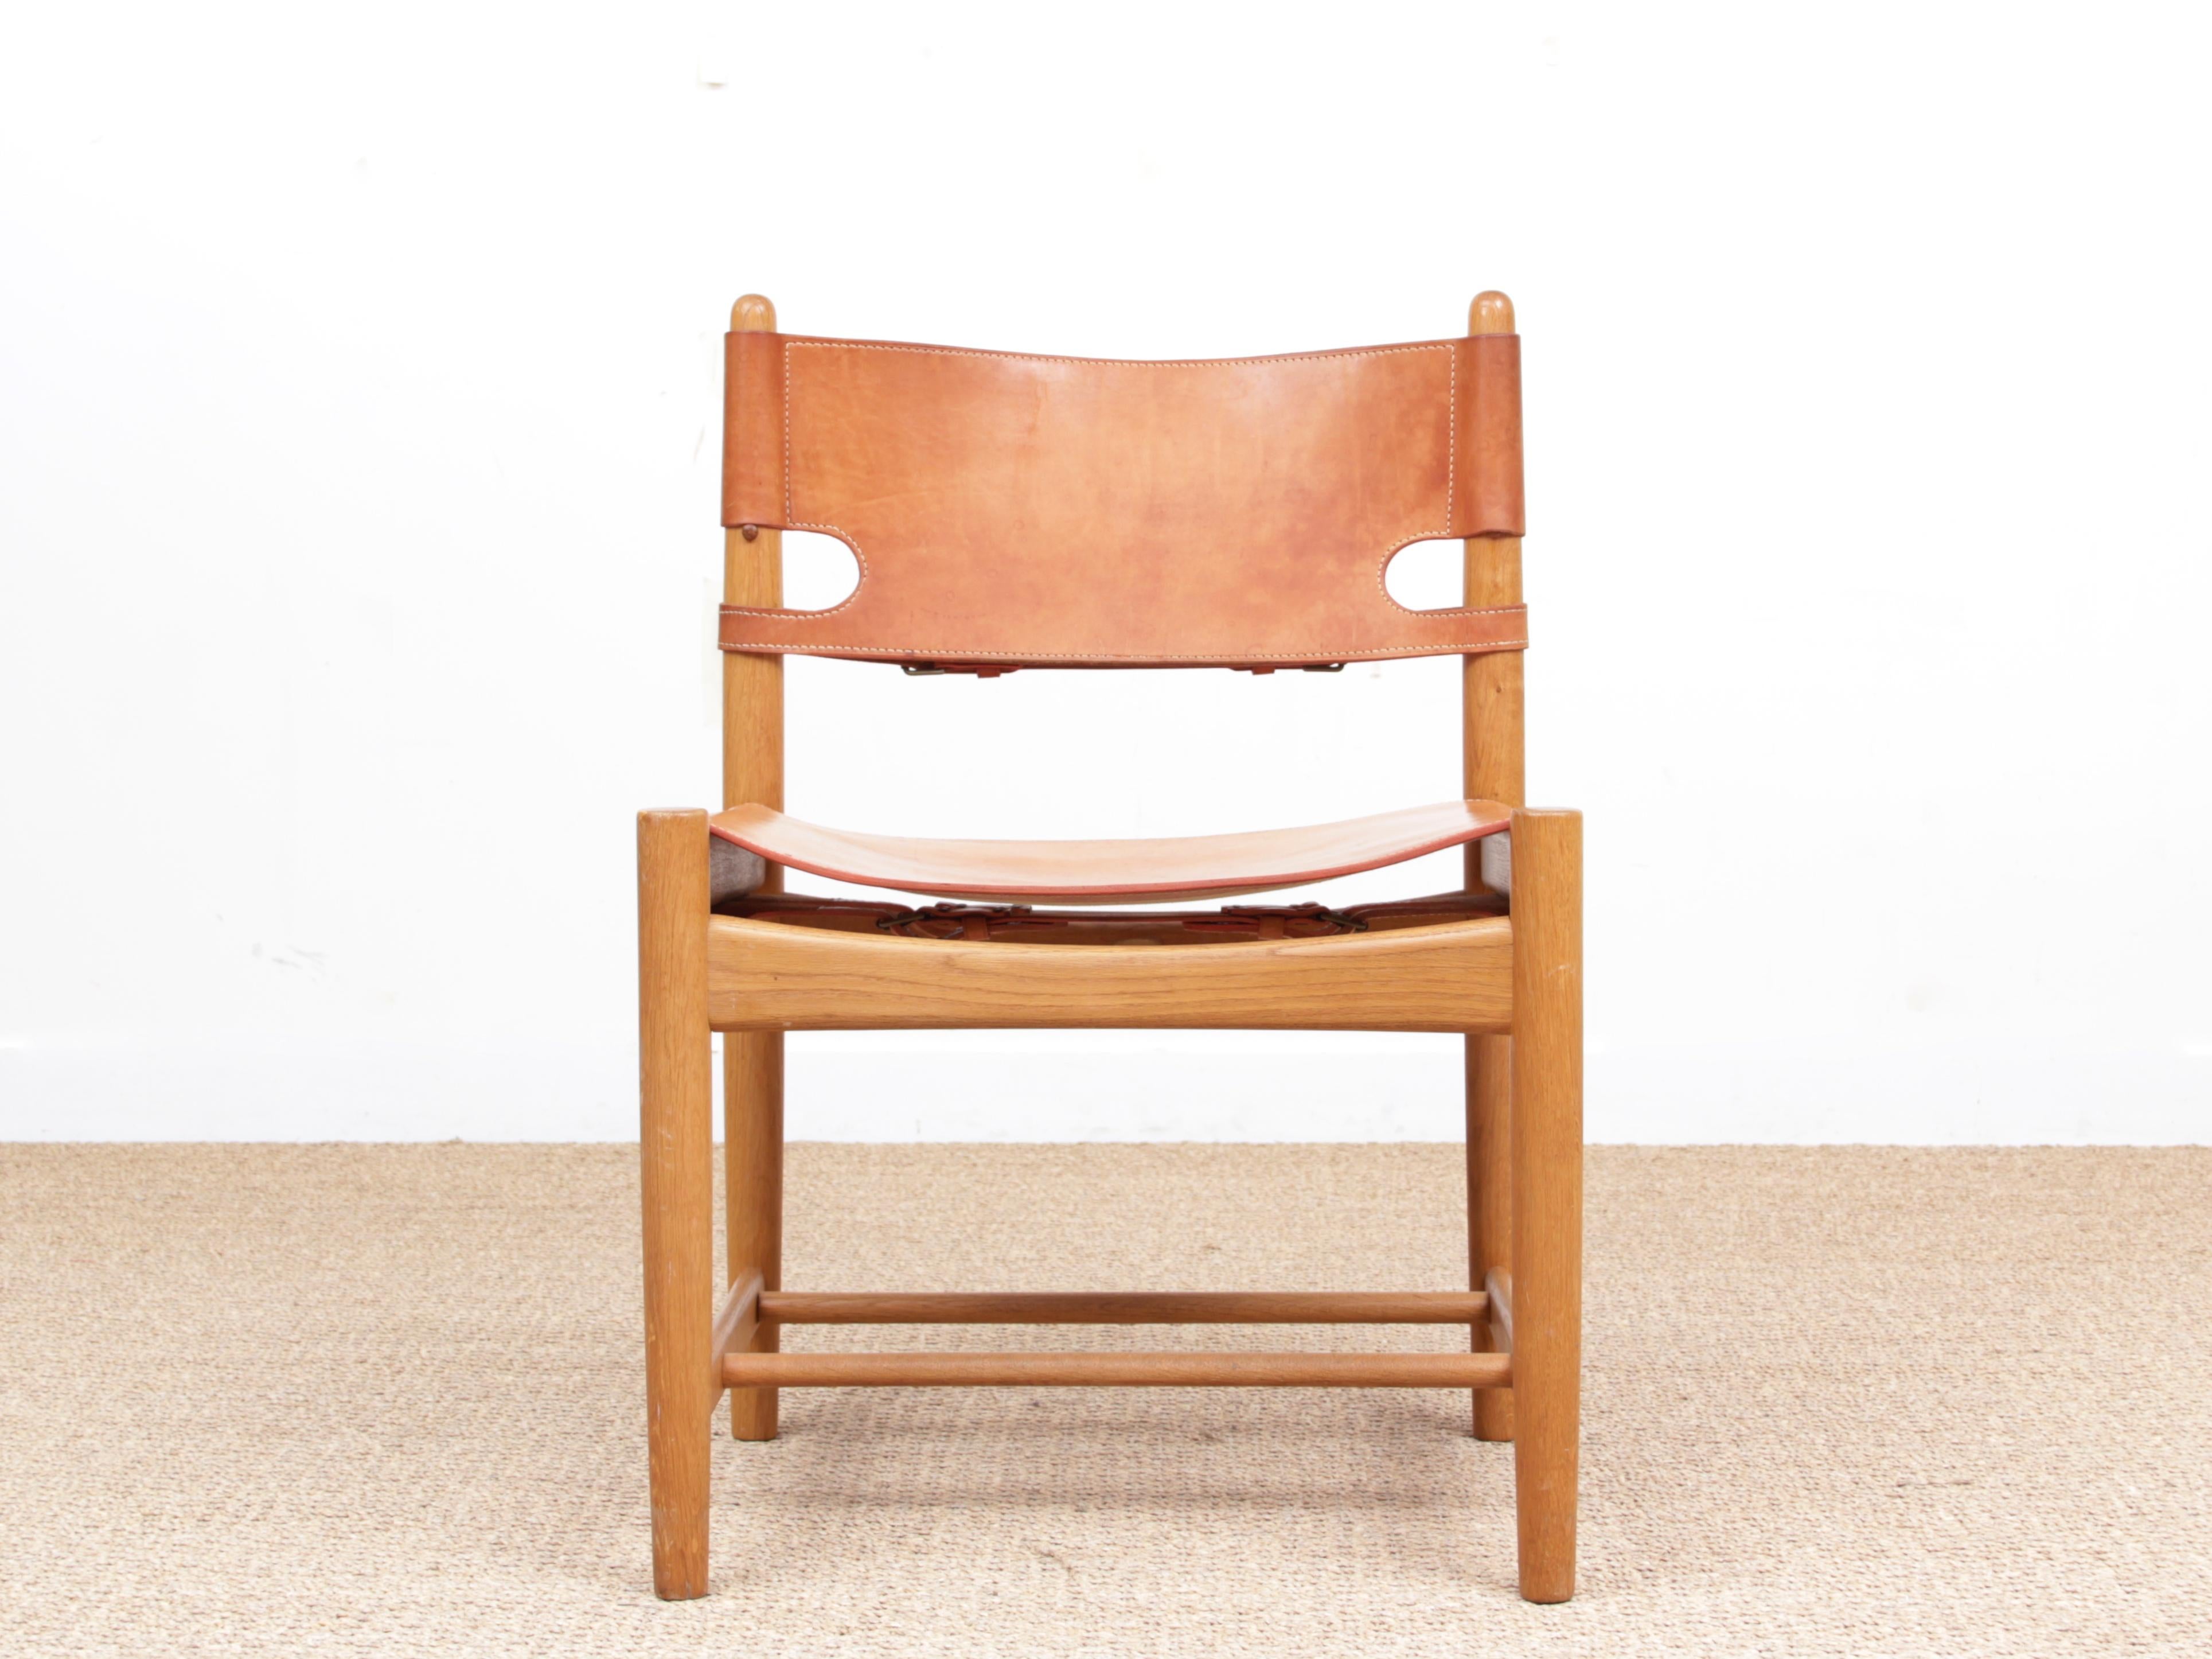 Mid-Century Modern scandinavian set of 4 chairs by Borge Mogensen model 3237 for Fredericia Furniture. Solid laquered oak and leather. Piece bought in 1970. Initialy produced by cabinet maker Erhard Rasmussen, it has been later produced by